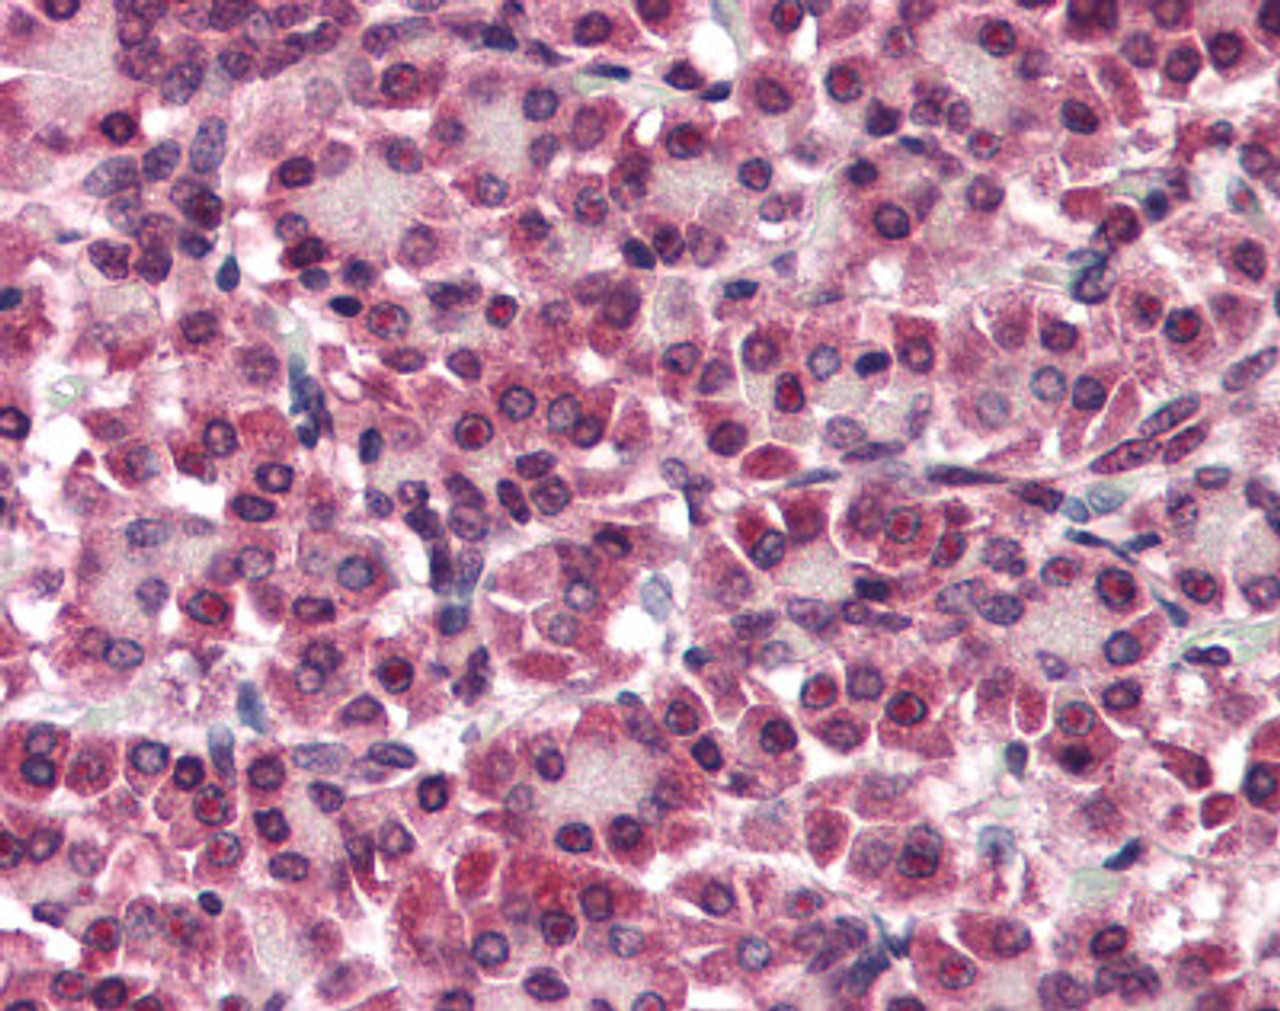 Immunohistochemistry staining of Glypican 4 in pancreas tissue using Glypican 4 Antibody.